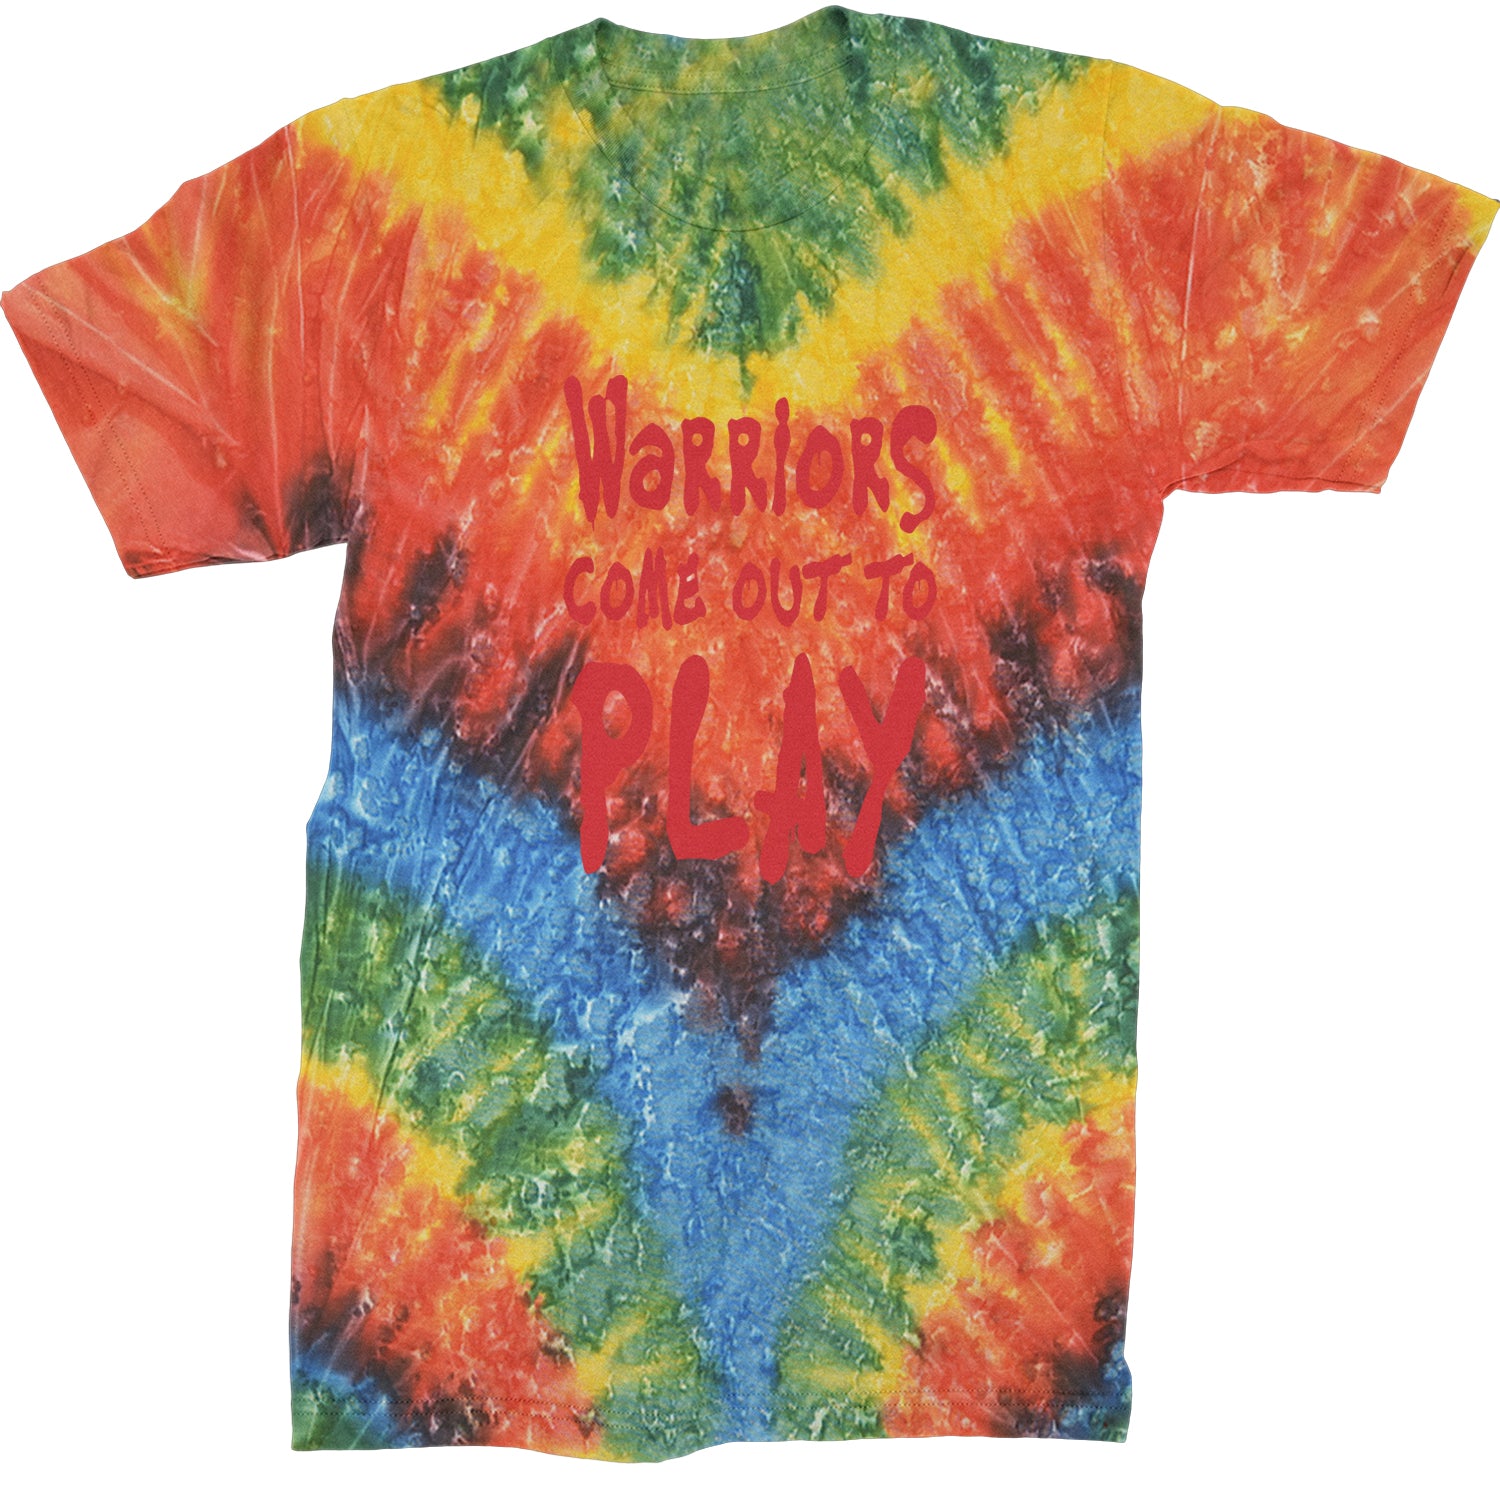 Warriors Come Out To Play  Mens T-shirt Tie-Dye Woodstock